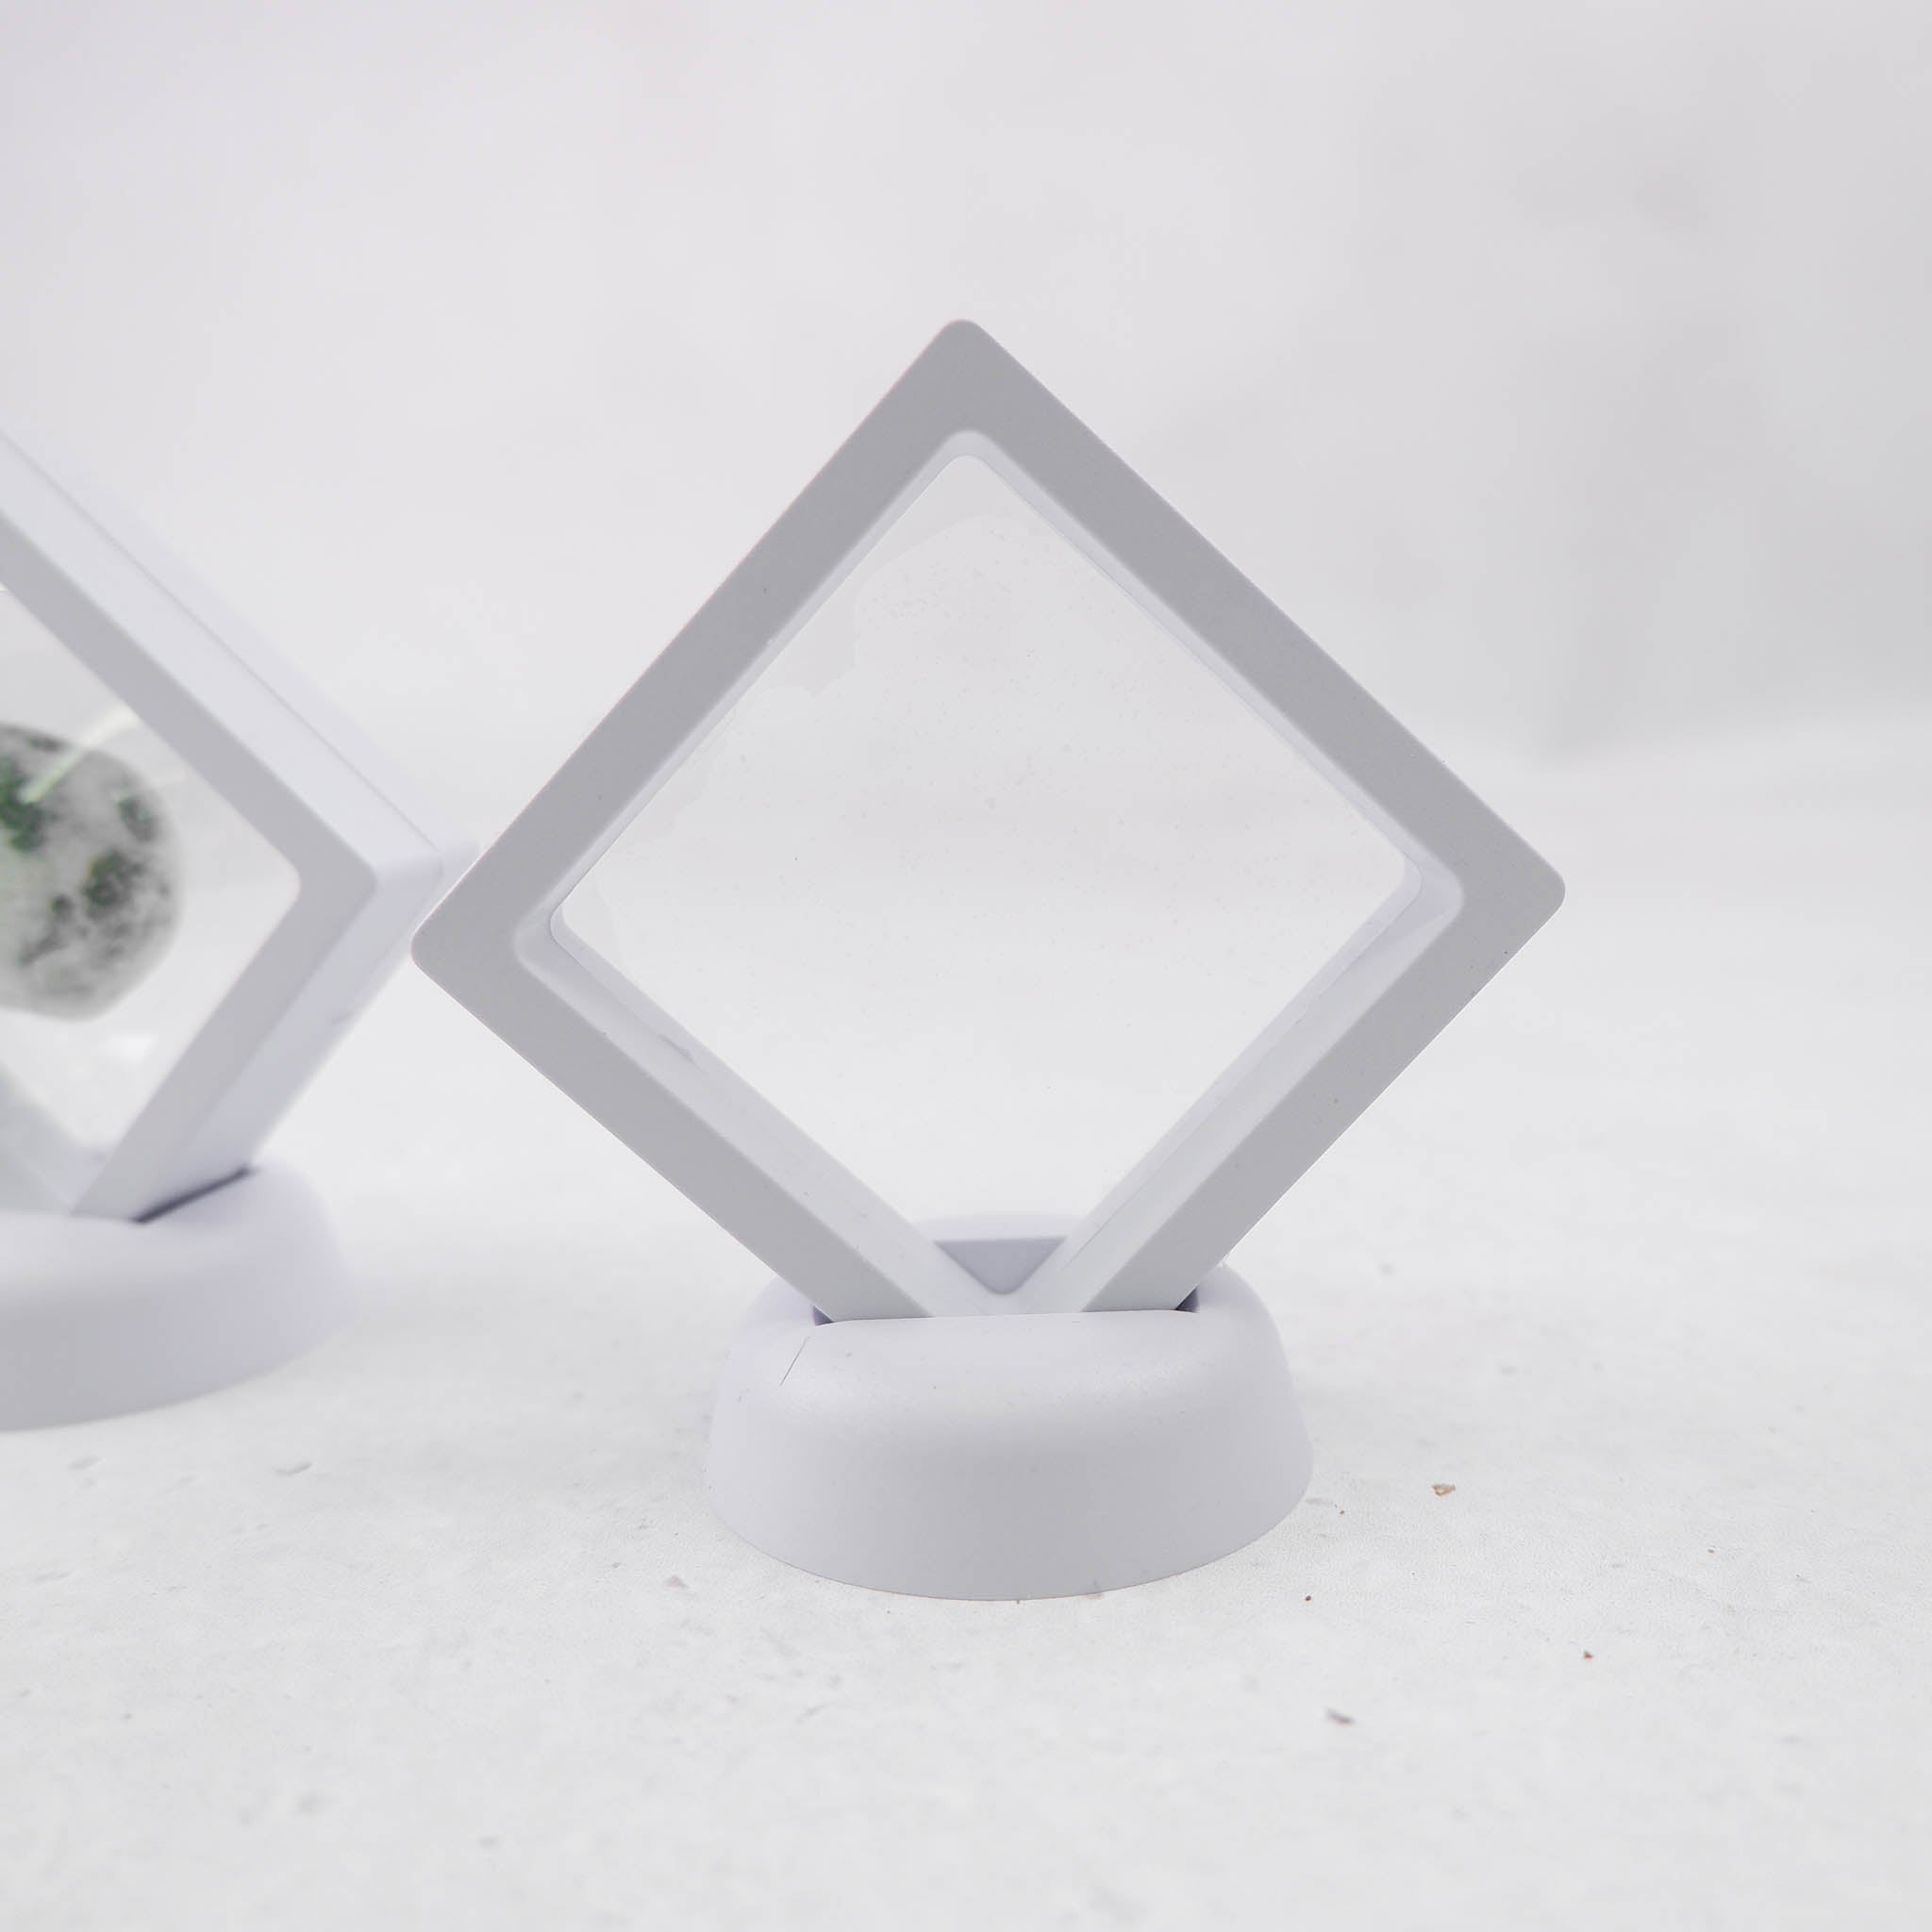 Mineral Display Stand - Crystal & Stone